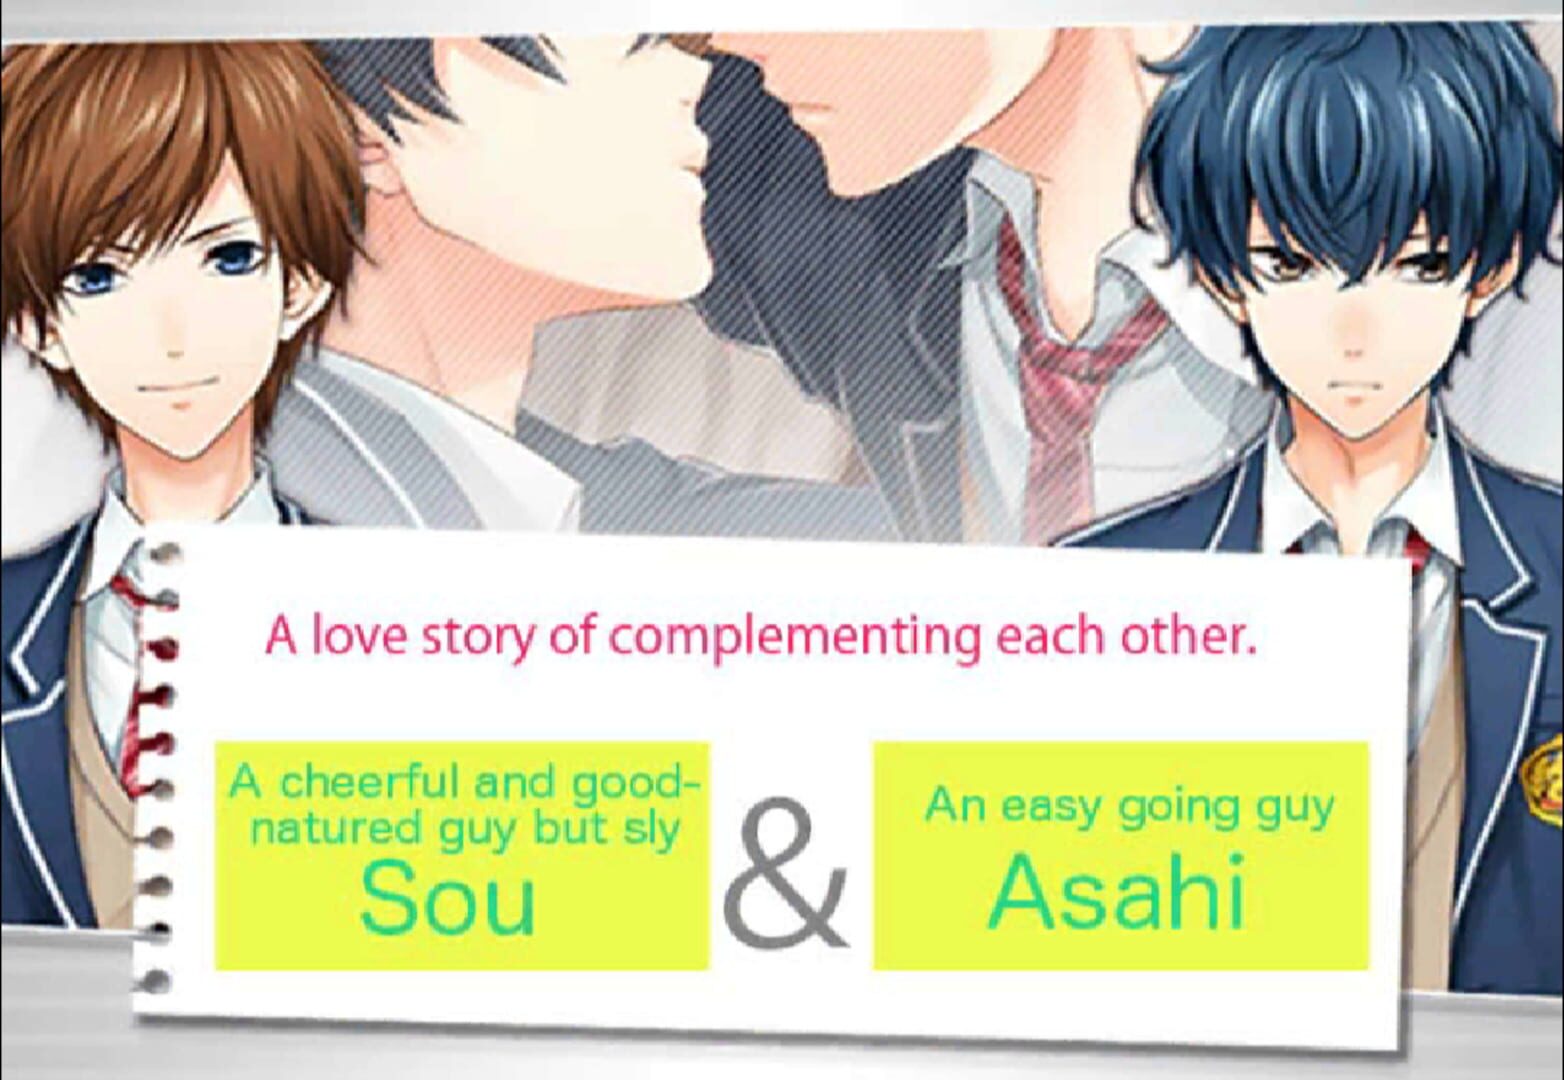 That new story. First Love story Yaoi со и Асахи. First Love story Otome. First Love story Асахи и Читосе. Новелла first Love story.